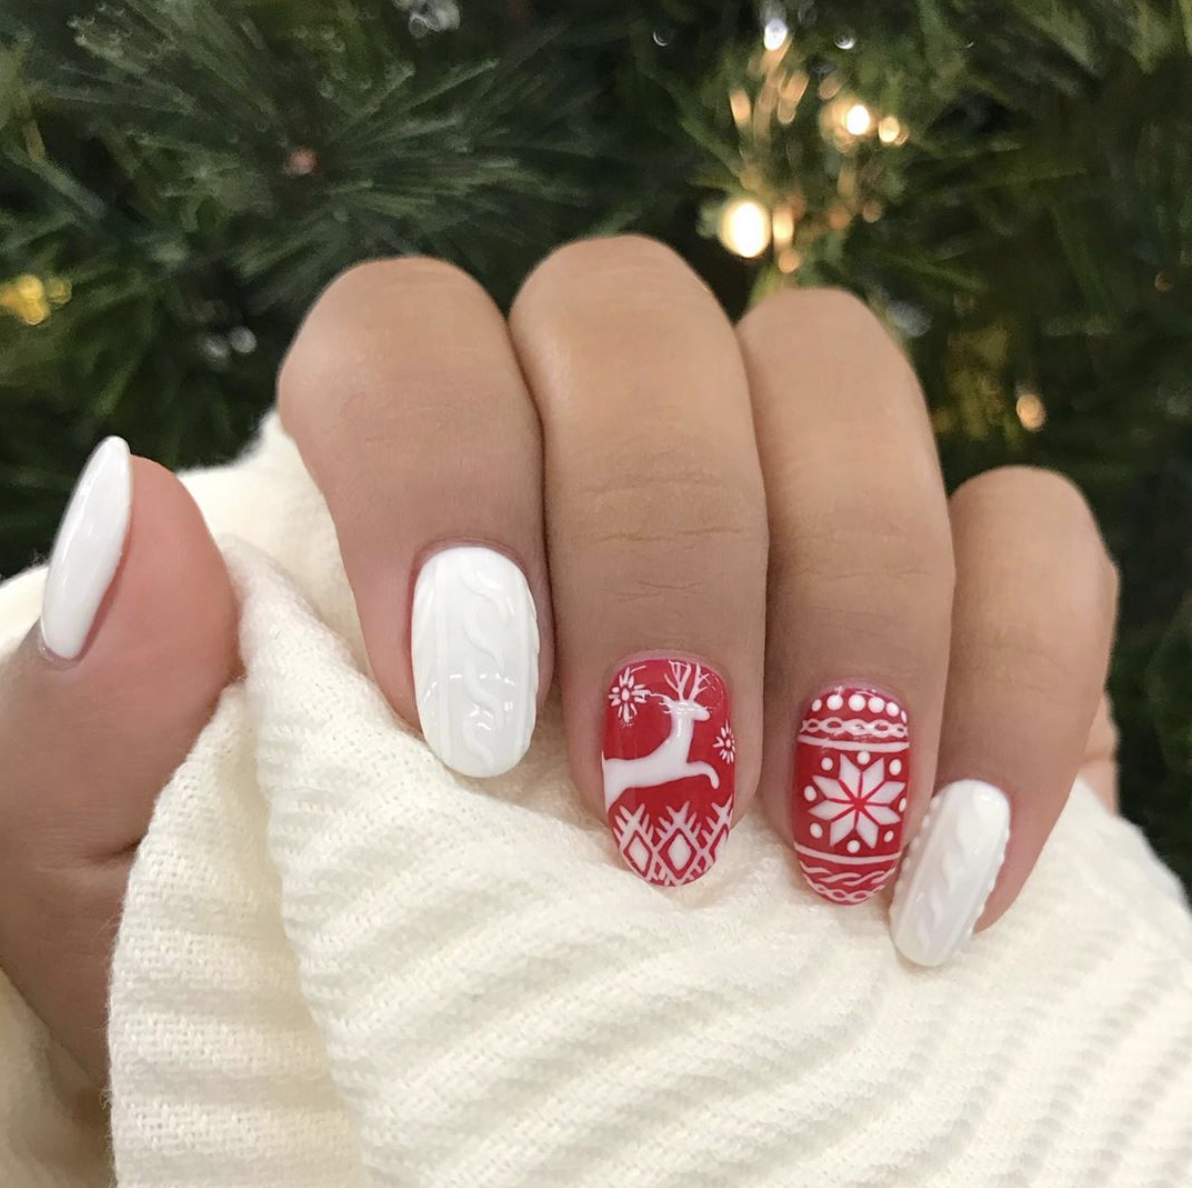 Get Party-Ready with Our Top 10 Holiday-Inspired Nail Designs – The W Nail  Bar